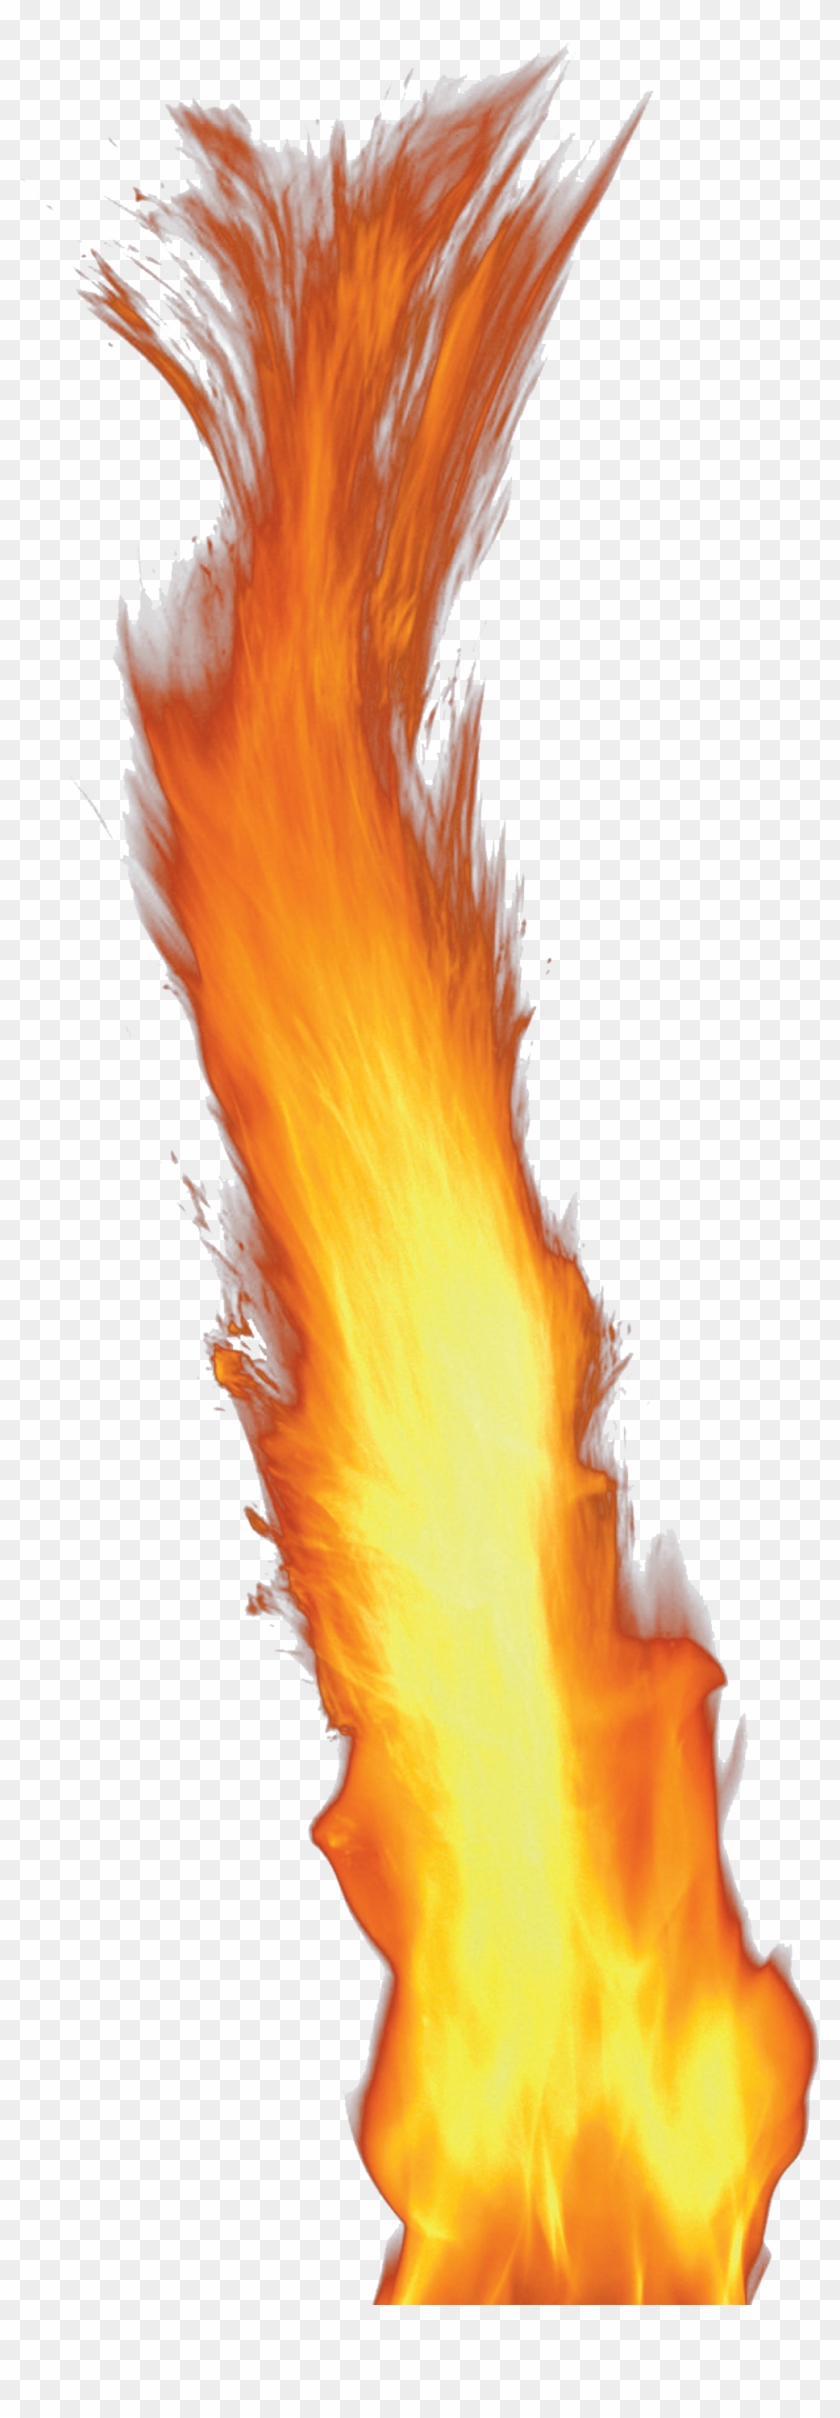 Fire Gif Png Transparent Background Fire Png Png Download 1560x2917 355 Pngfind